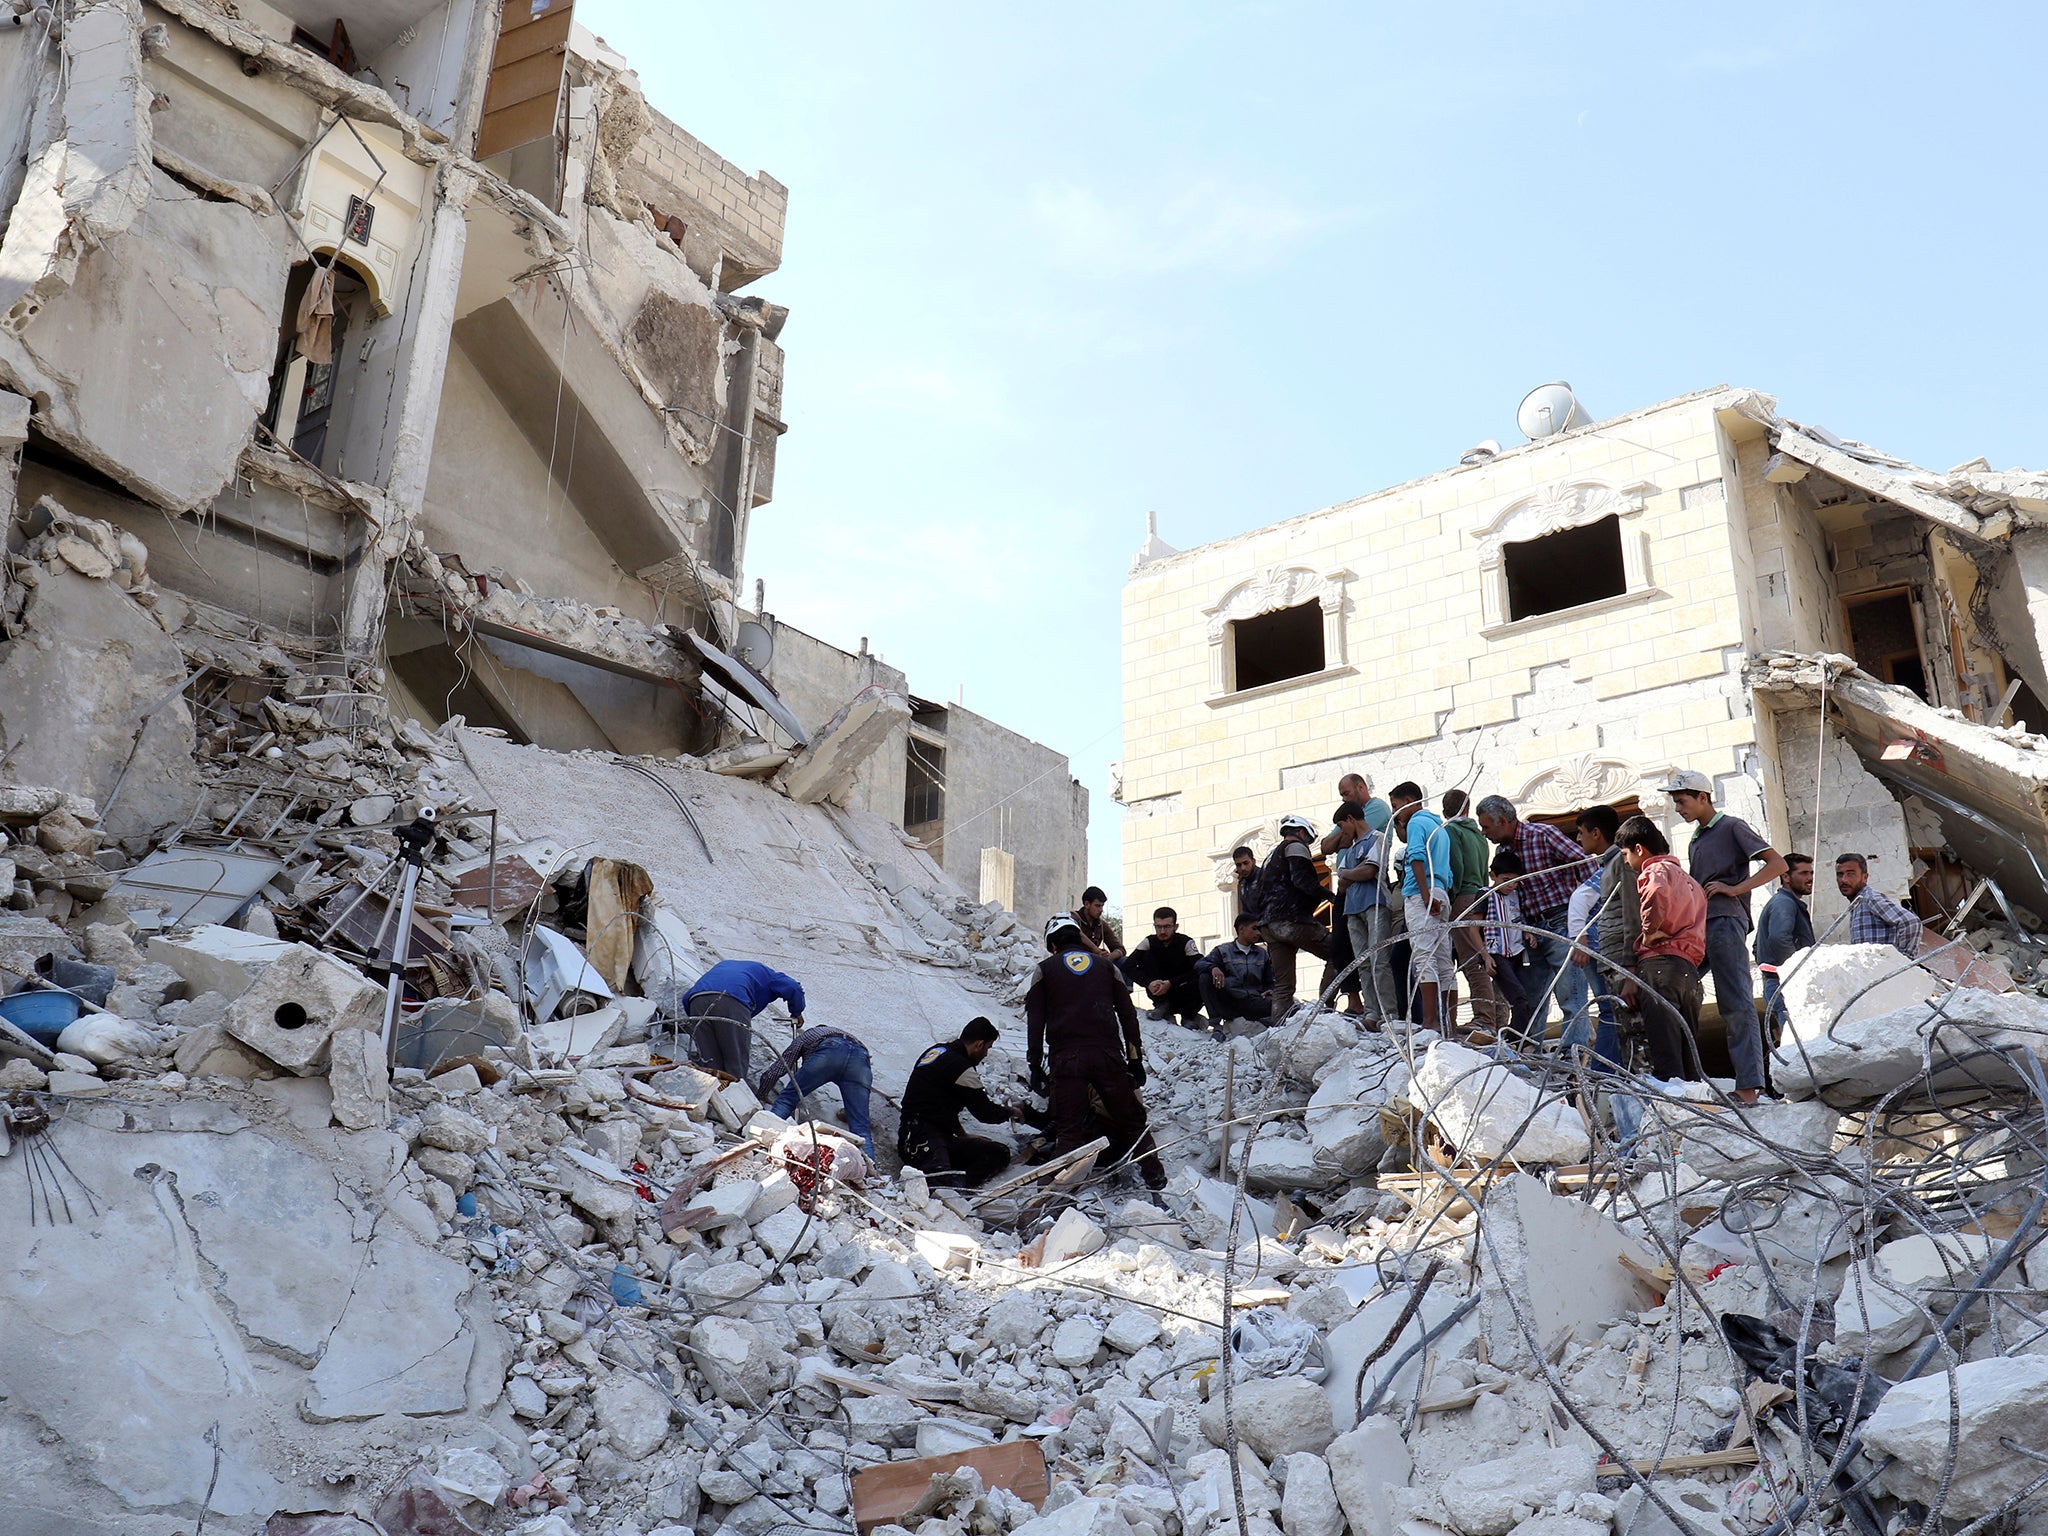 Civil defense members and civilians search for survivors under the rubble of a site hit by overnight airstrikes in the town of Kafr Takharim, in Idlib Governorate, Syria